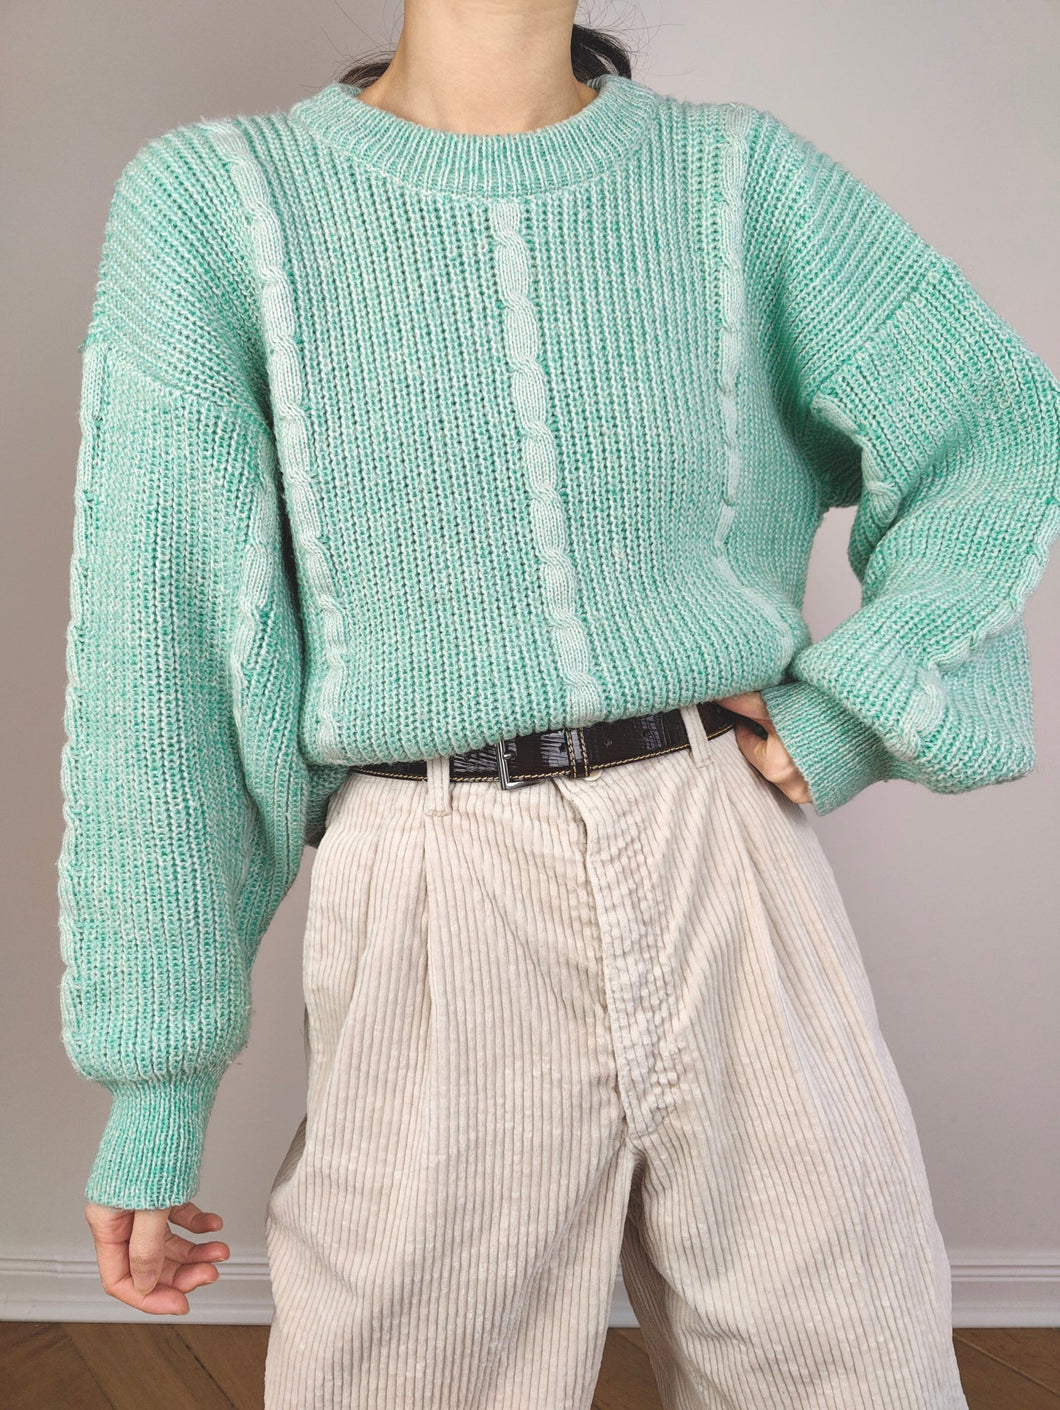 The Chunky Mint Knit | Vintage wool mix sweater jumper pullover cable knit plain green blue M